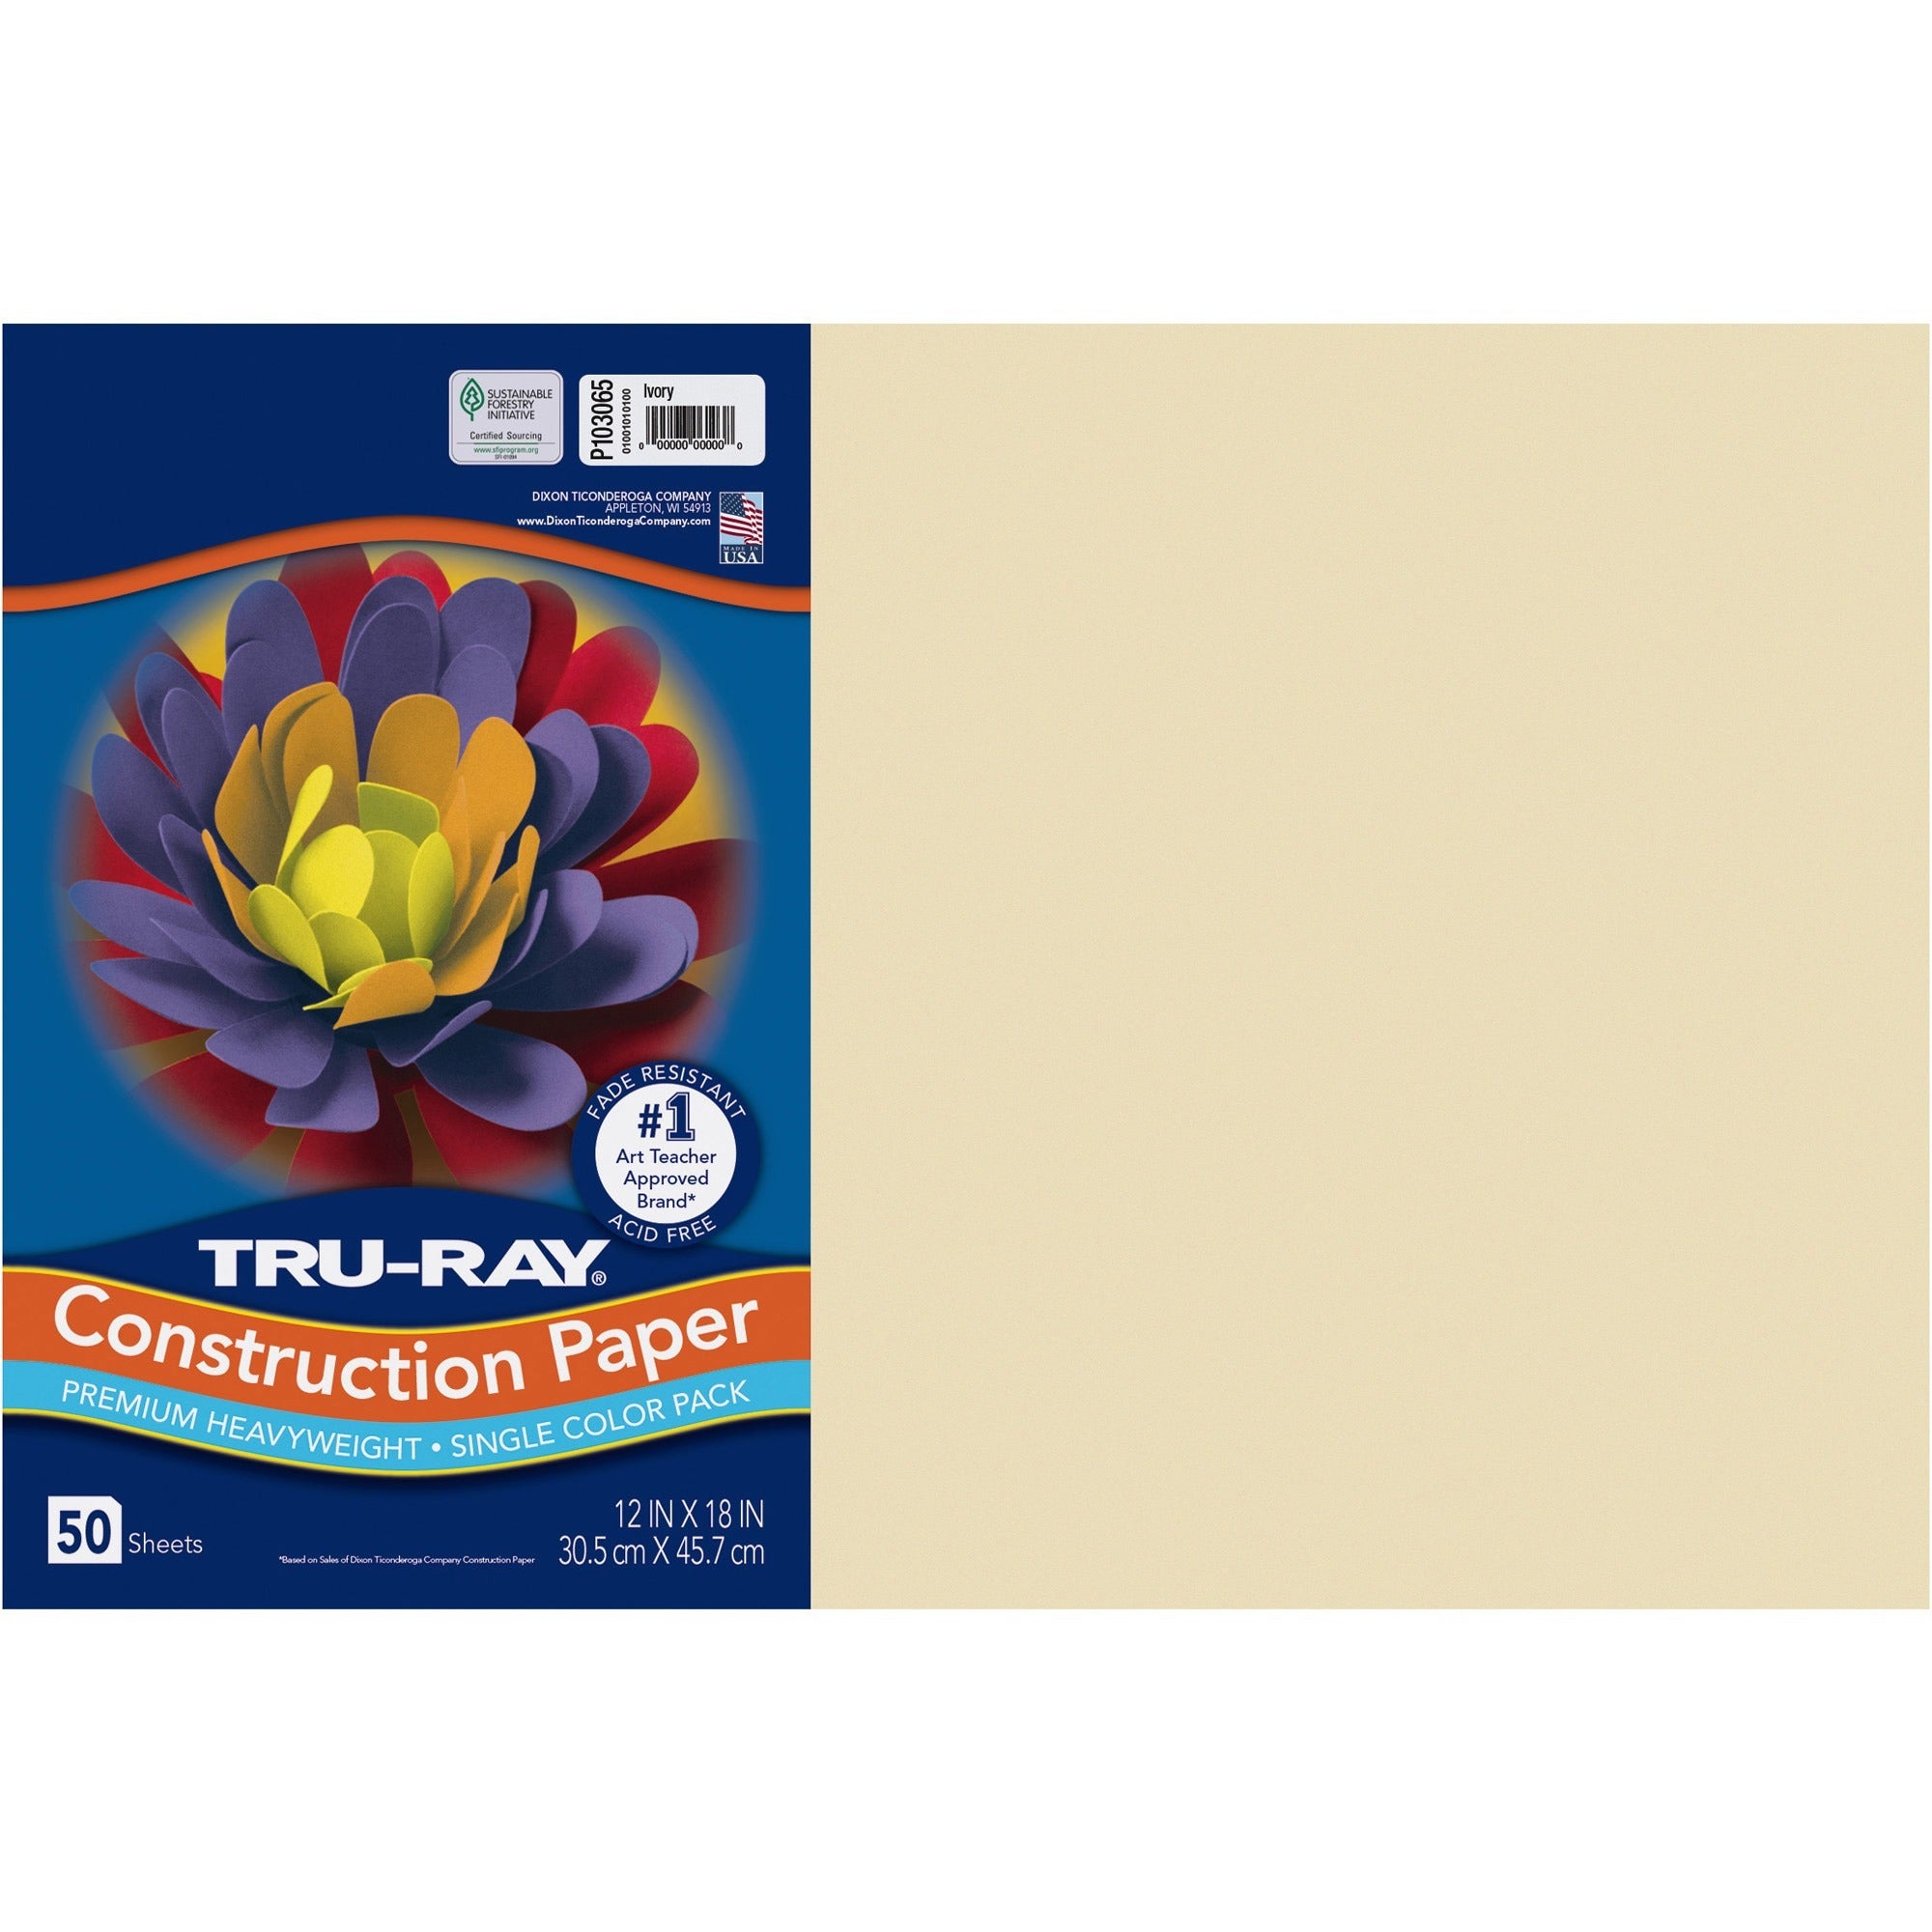 tru-ray-construction-paper-art-project-craft-project-12width-x-18length-76-lb-basis-weight-50-pack-ivory-fiber-sulphite_pacp103065 - 1